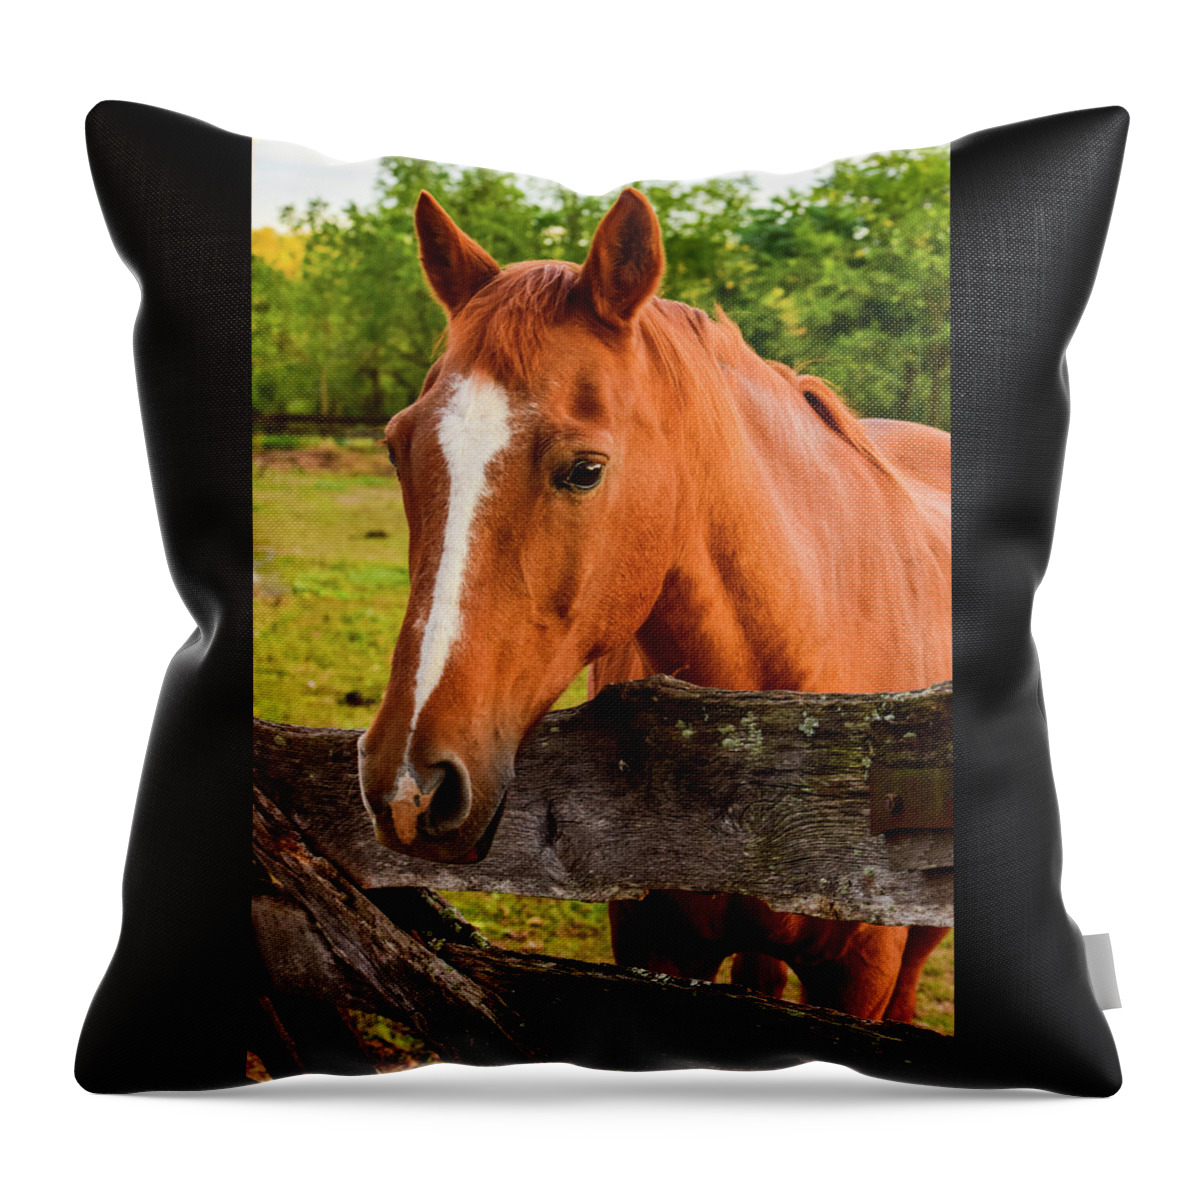 Horse Throw Pillow featuring the photograph Horse Friends by Nicole Lloyd